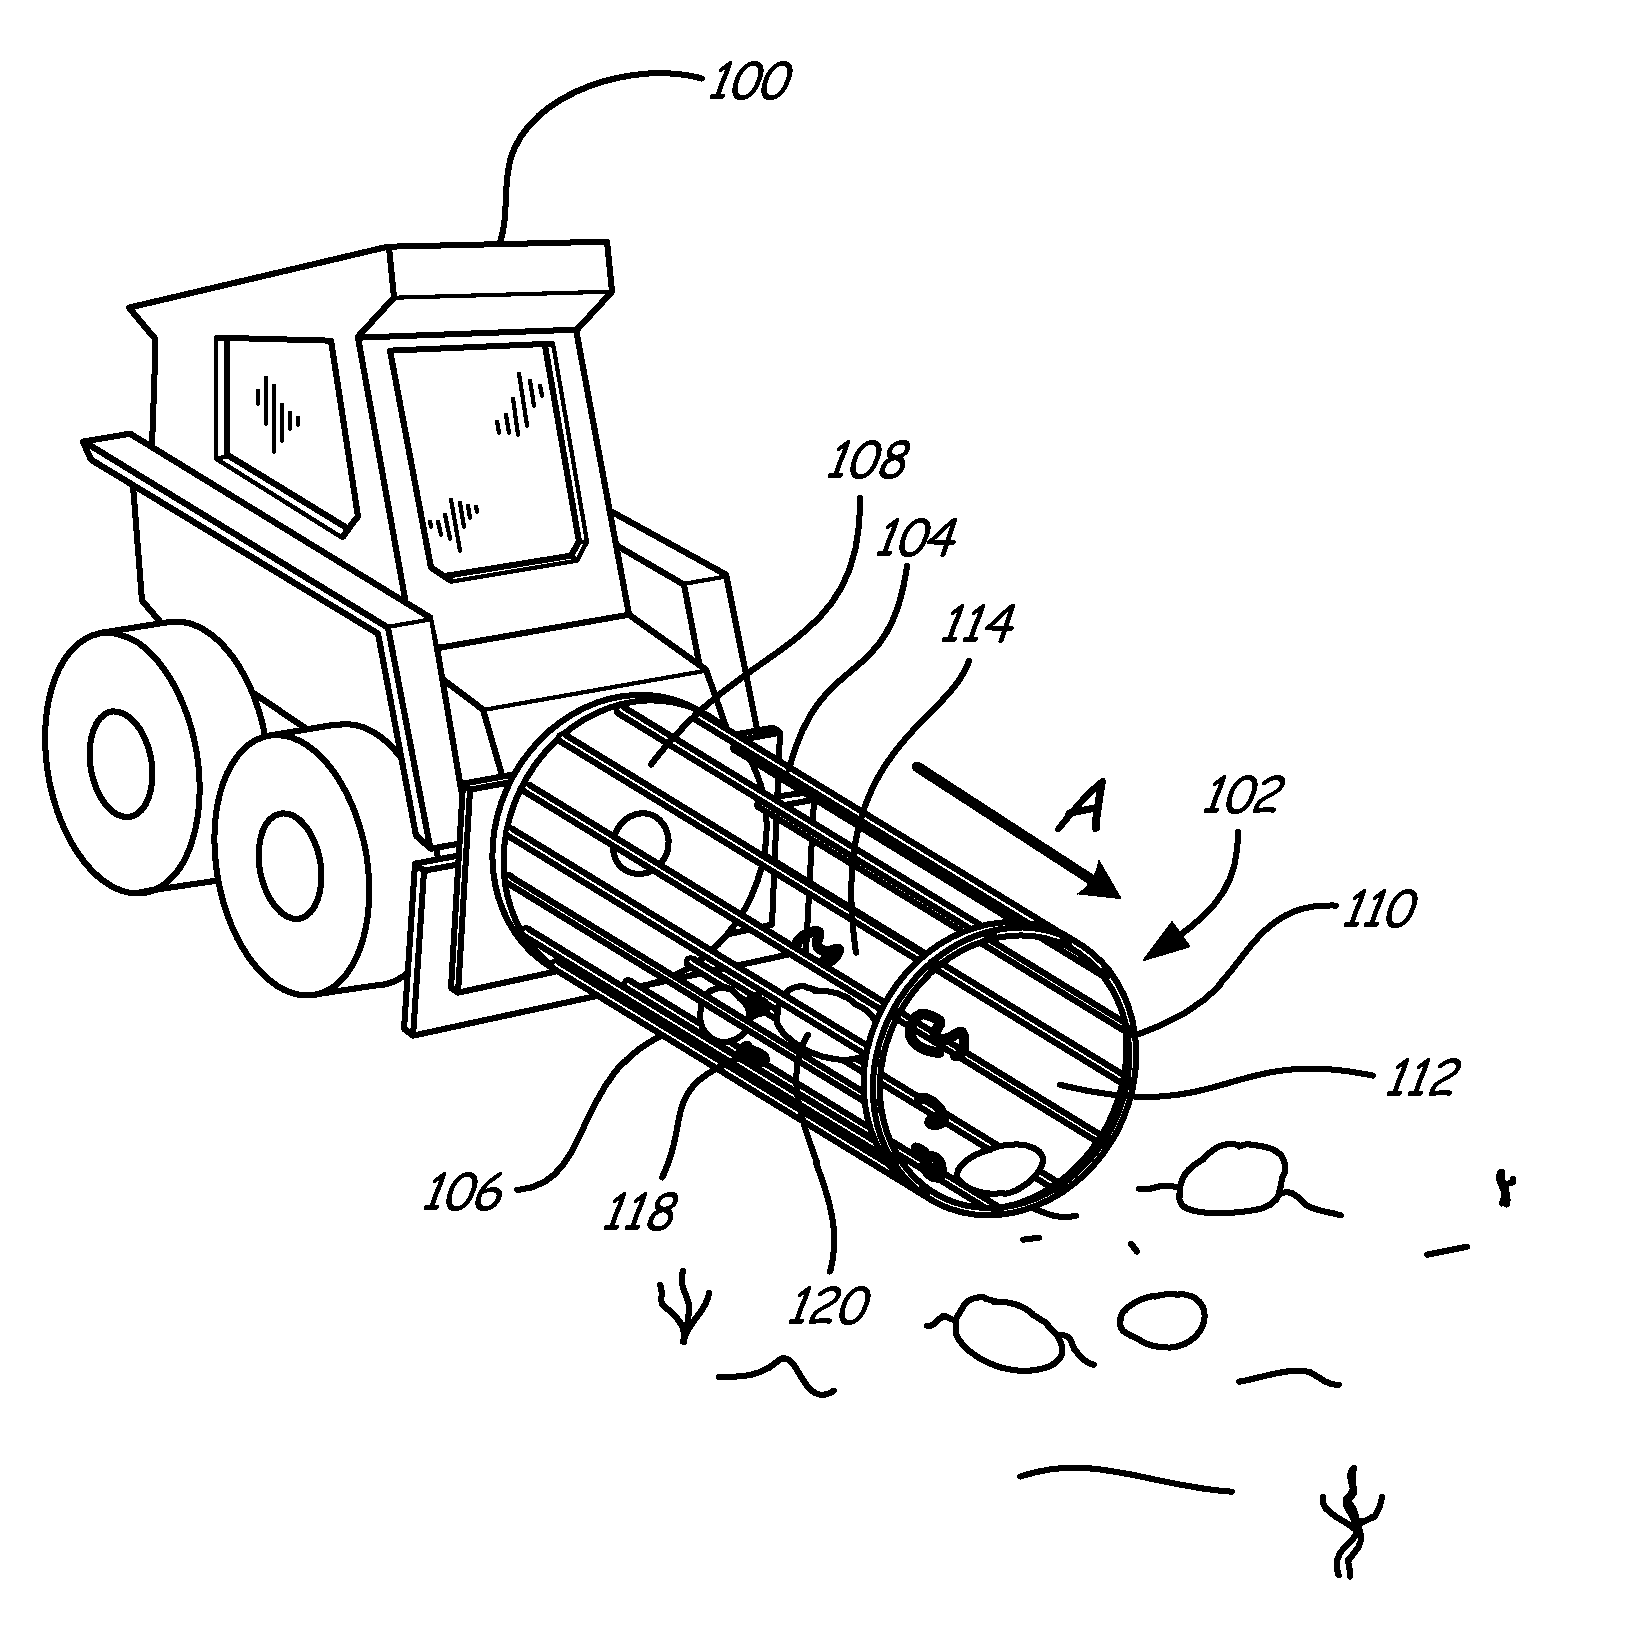 Rock picker and tumbler